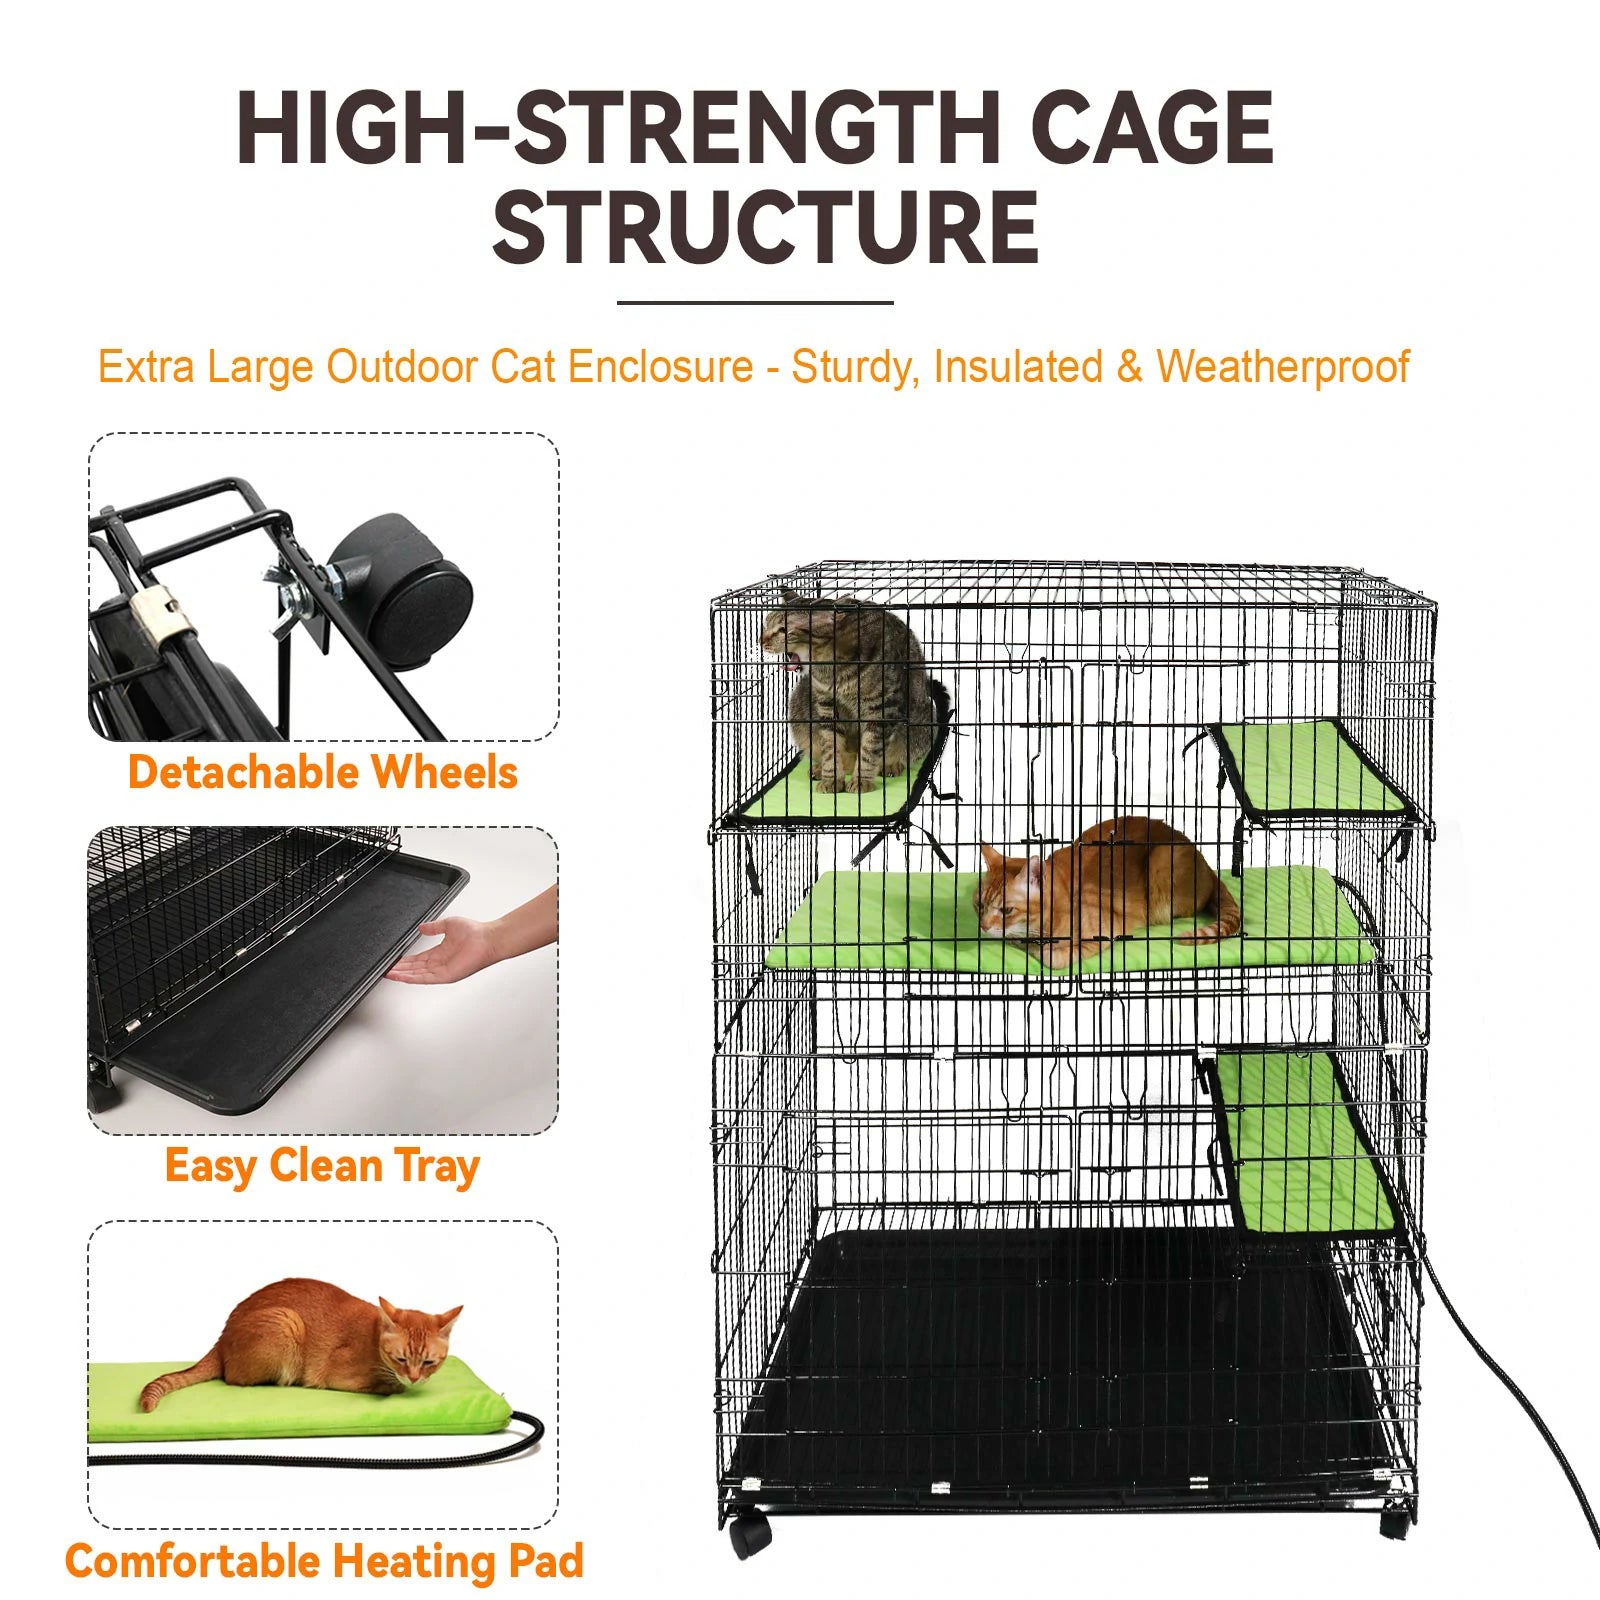 high strength cage structure